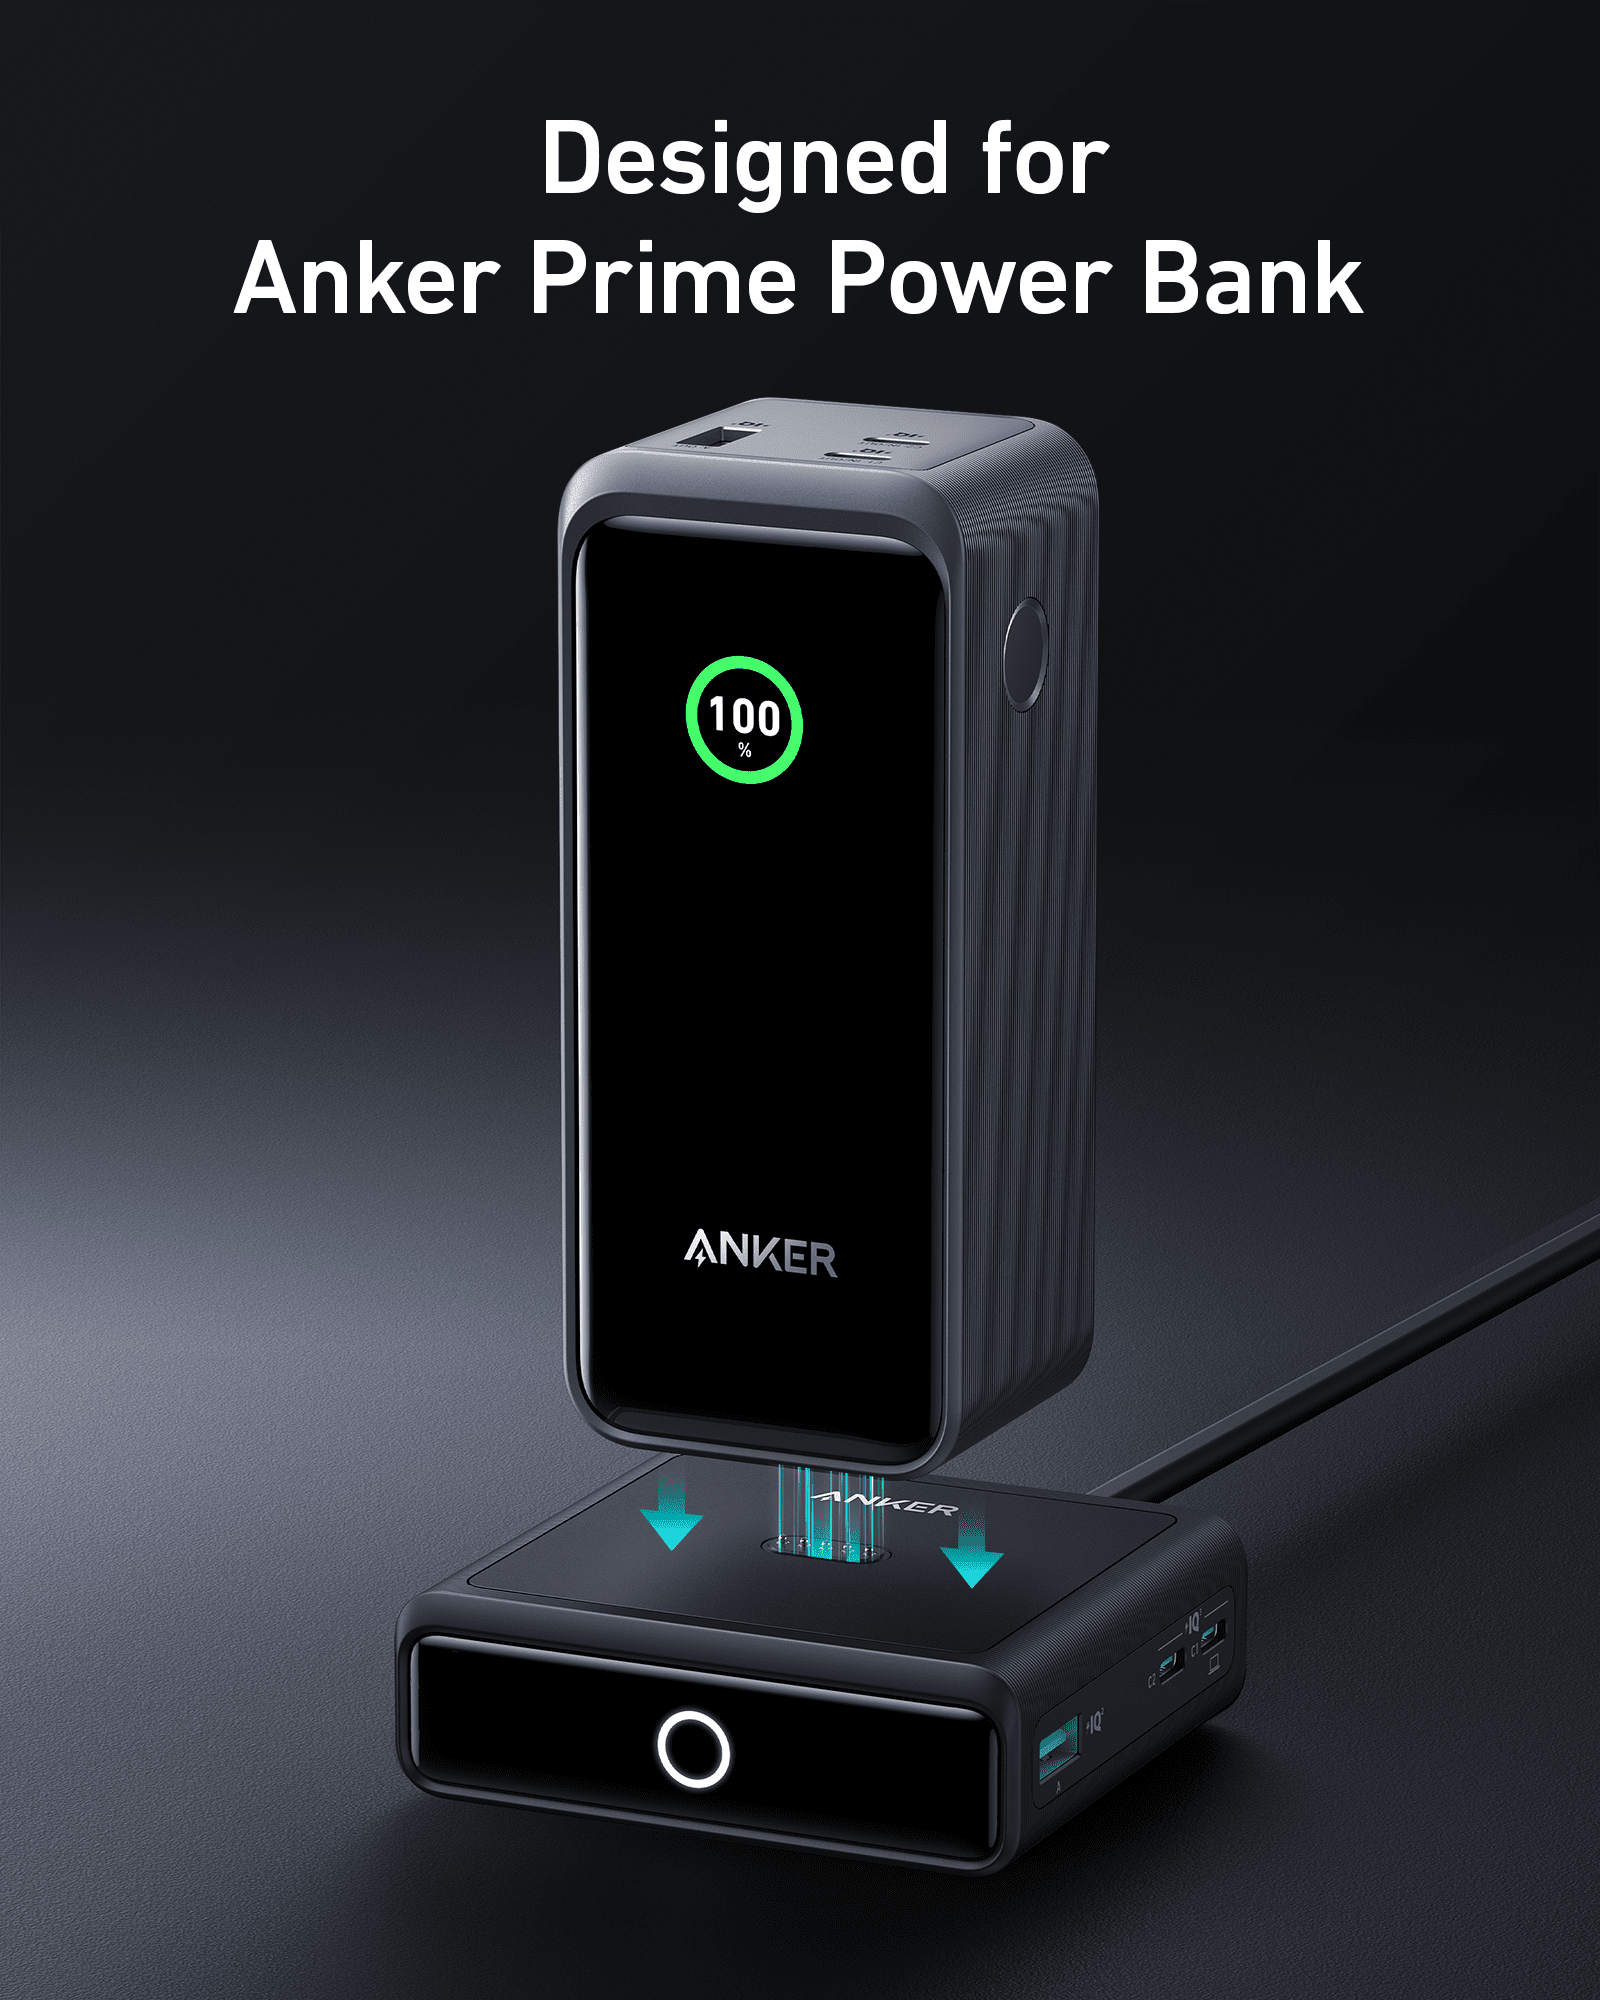 Anker Prime Power Bank, 20,000mAh Portable Charger with 200W Output, Smart  Digital Display Charging Base, 100W Fast Charging with 4 Ports, for MacBoo